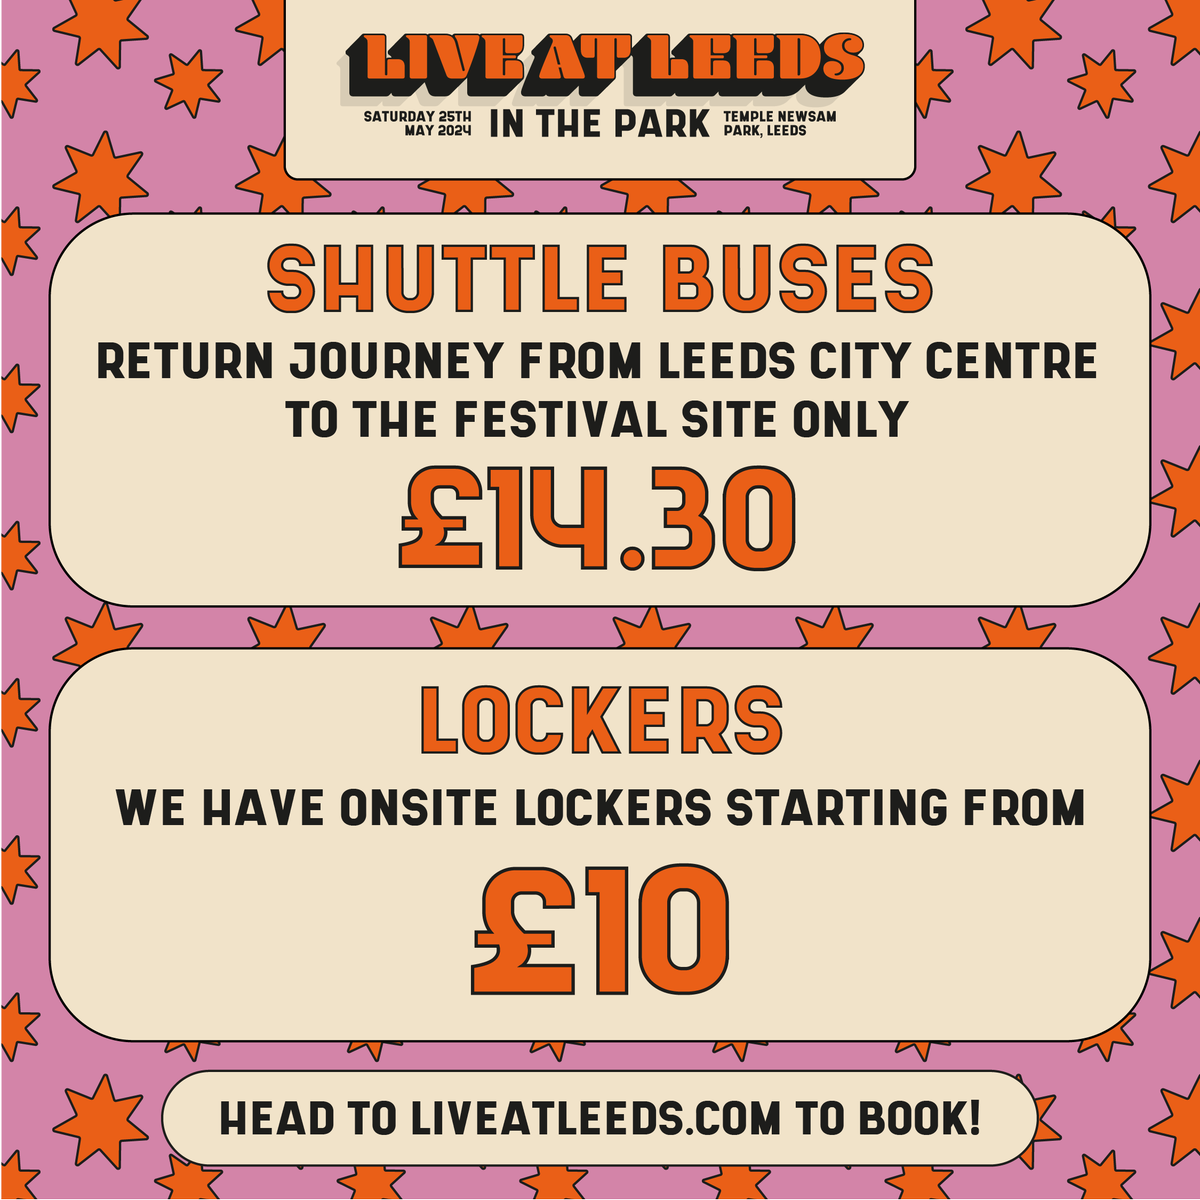 Want to make your Live At Leeds In The Park 2024 experience easier? Secure your return travel from Leeds City Centre for just £14.30 🚌 Lockers are from £10, so you can store all your merch and more! Have you got yours yet? Head to liveatleeds.com to book now! 🥳